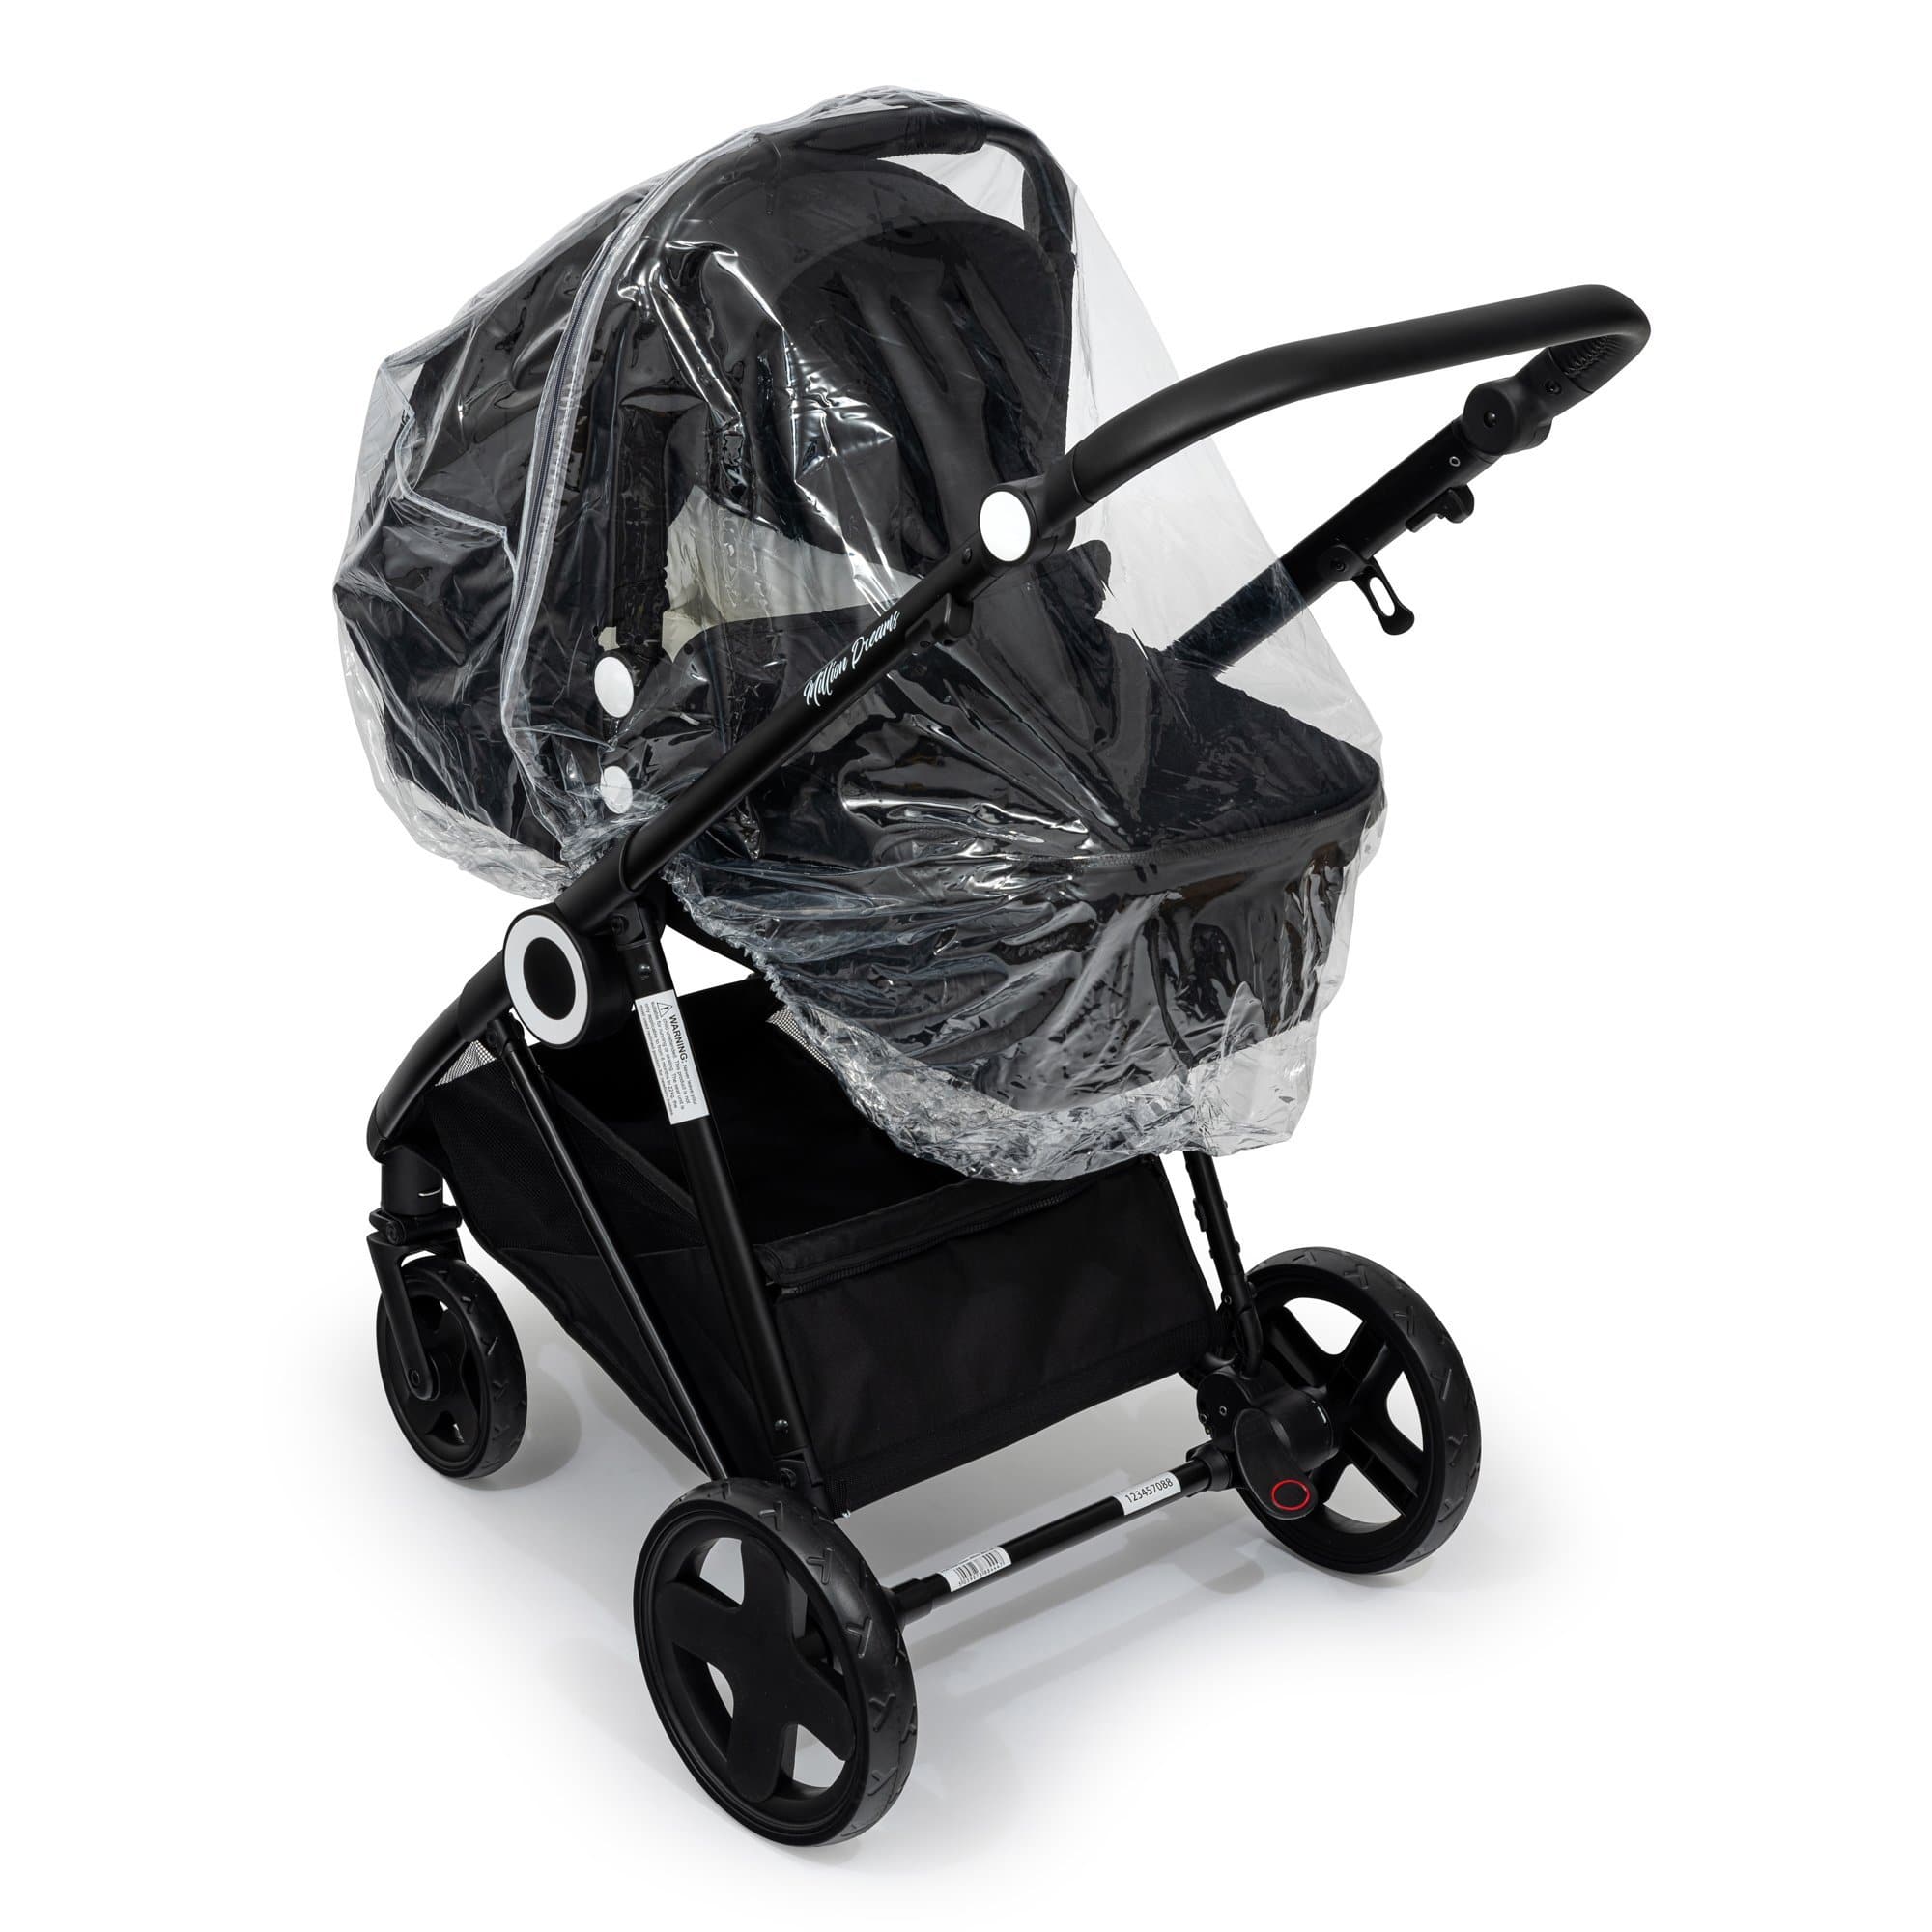 2 in 1 Rain Cover Compatible with Cybex - Fits All Models - For Your Little One